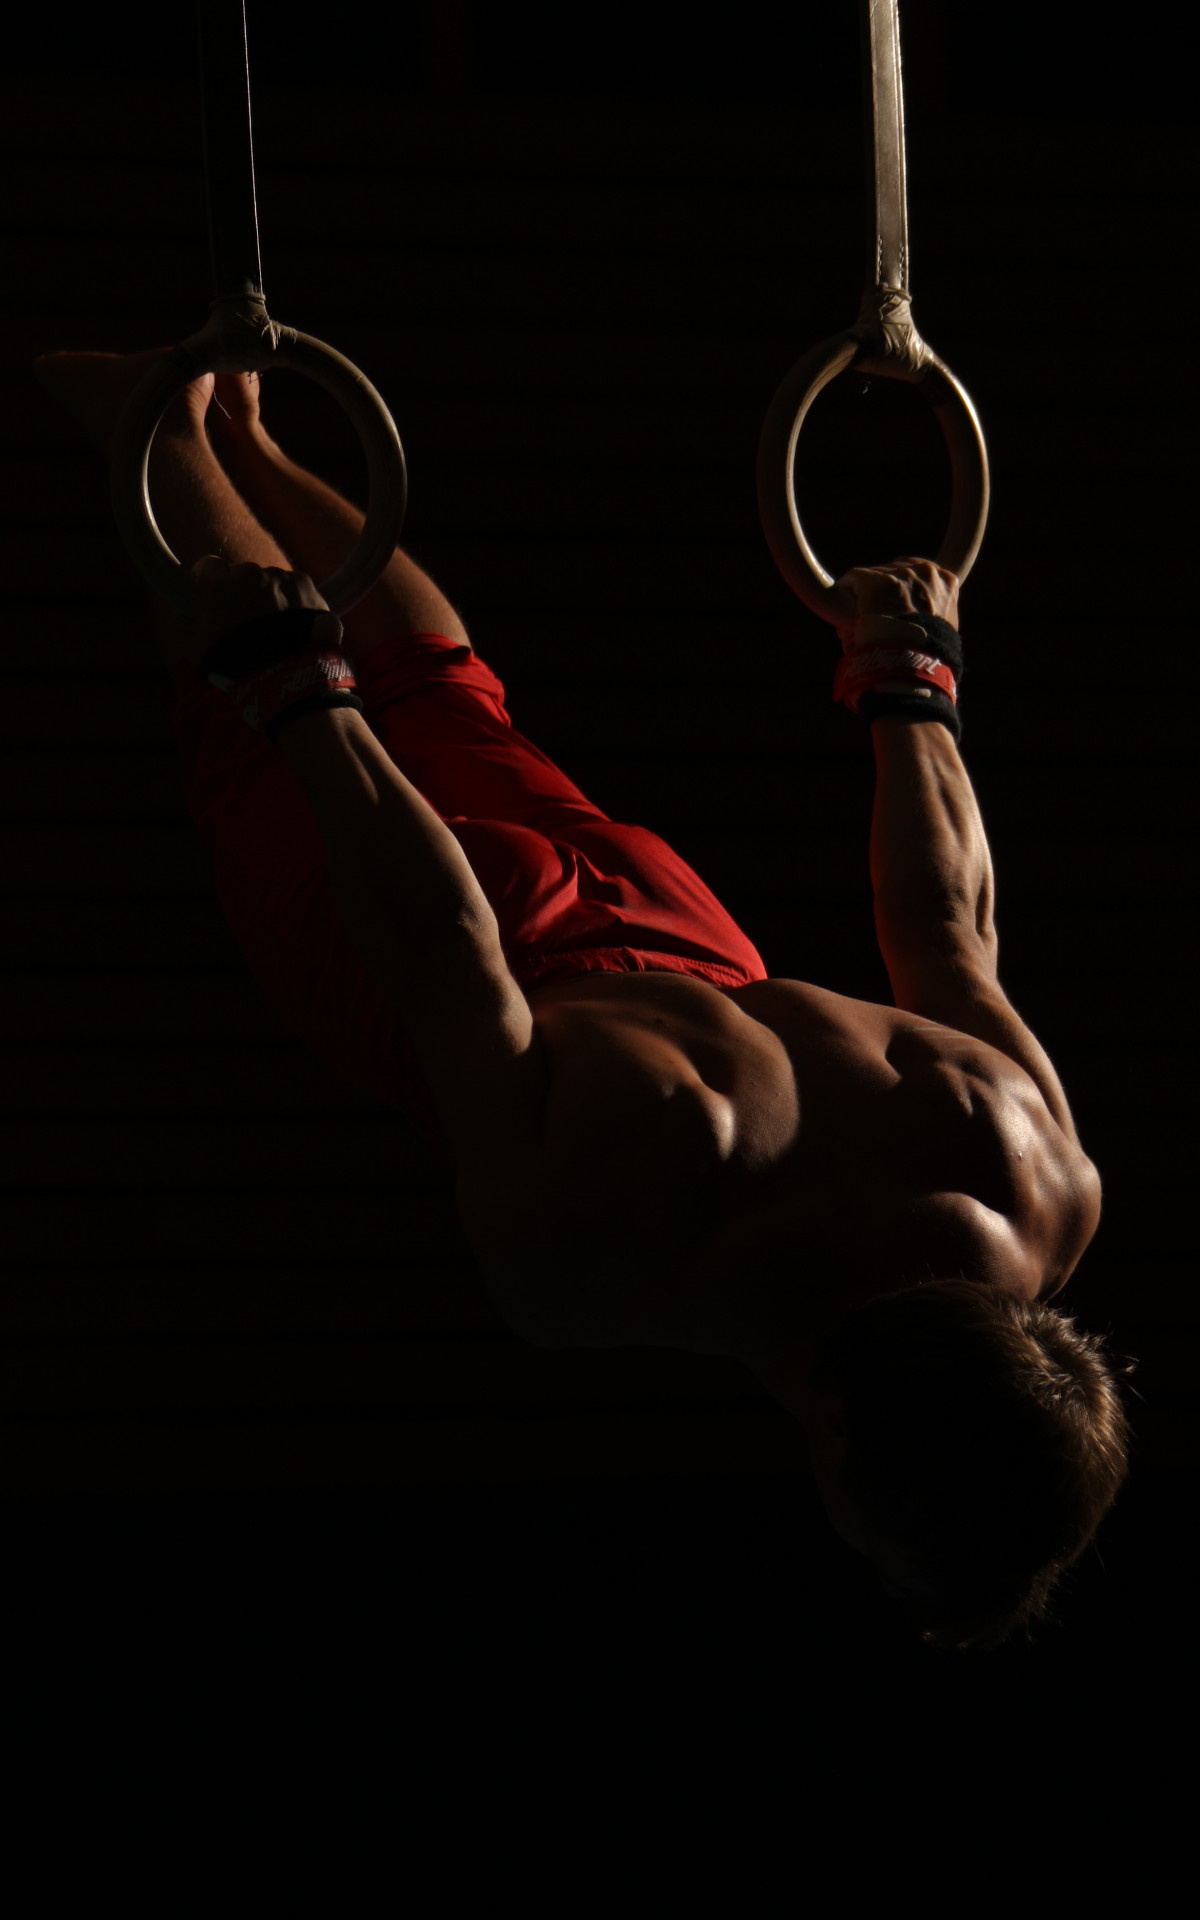 Acrobatic Gymnastics: A gymnast uses still rings - an artistic event apparatus that requires extreme upper body strength. 1200x1920 HD Background.